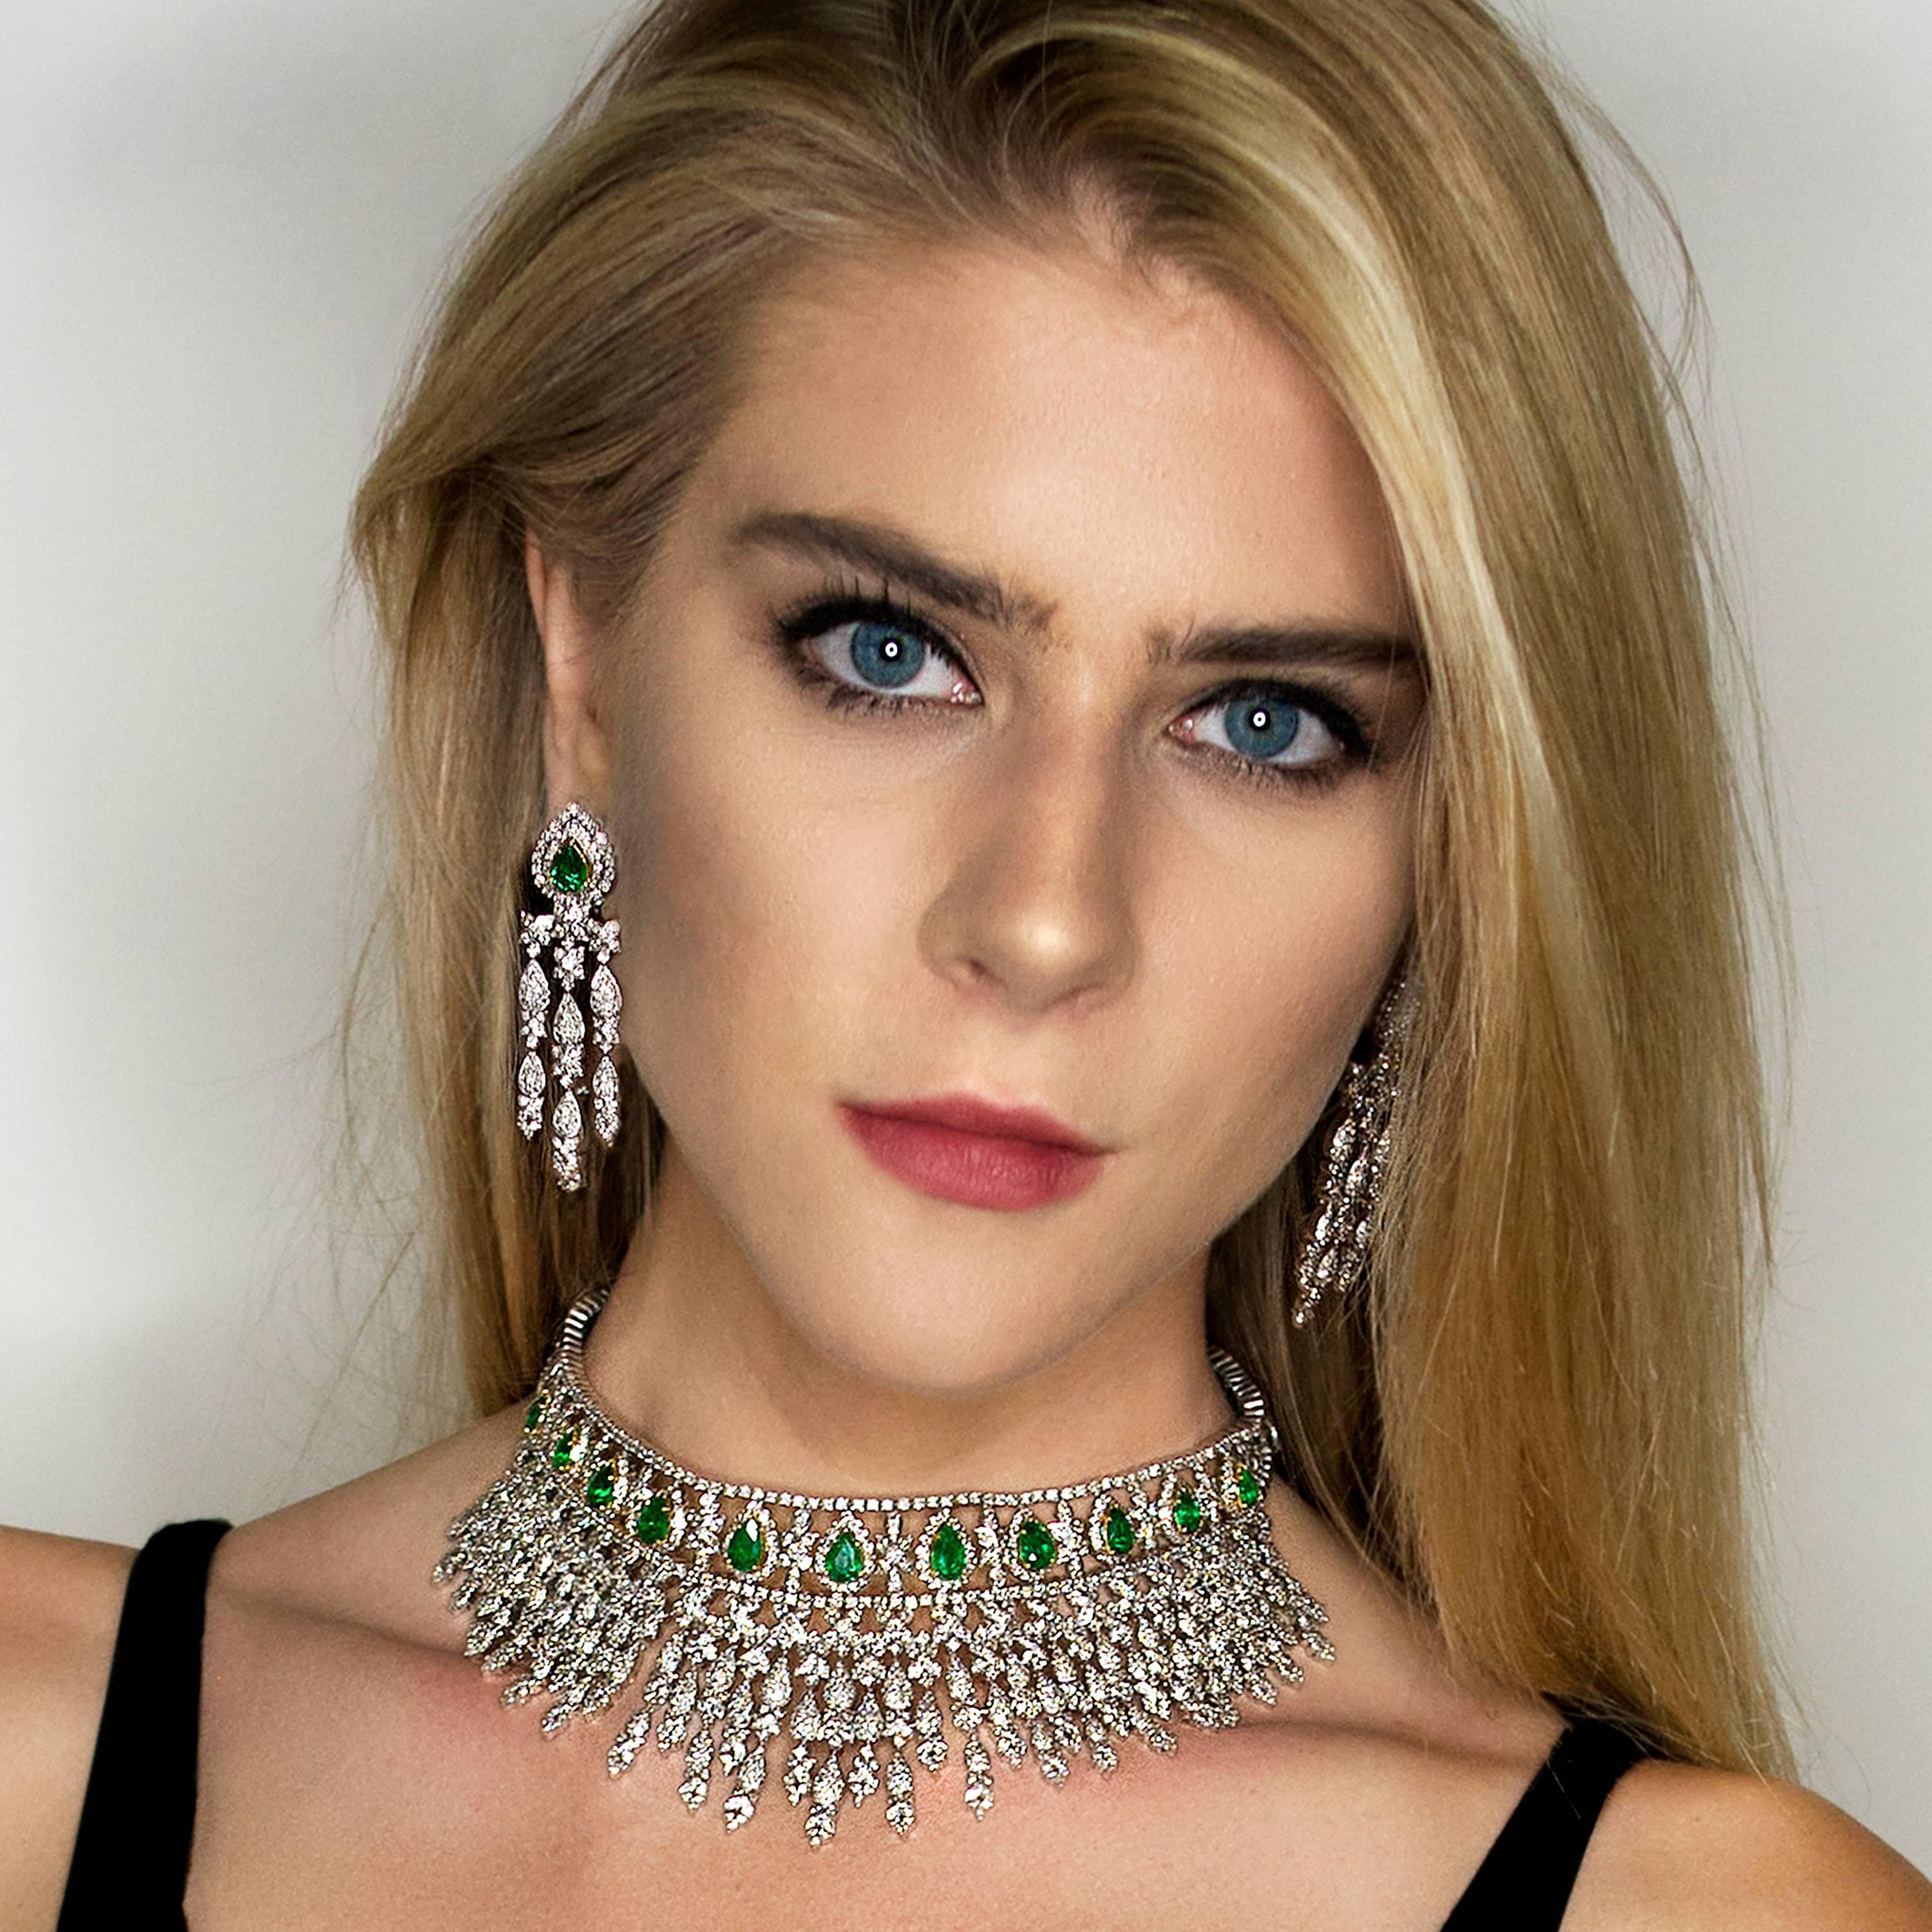 Fit for a queen! 18k White Gold Necklace & Earring Suite with 11 pear shape emeralds weighing 11.86 carats and approximately 33.00 carats of modern round brilliant diamonds. 